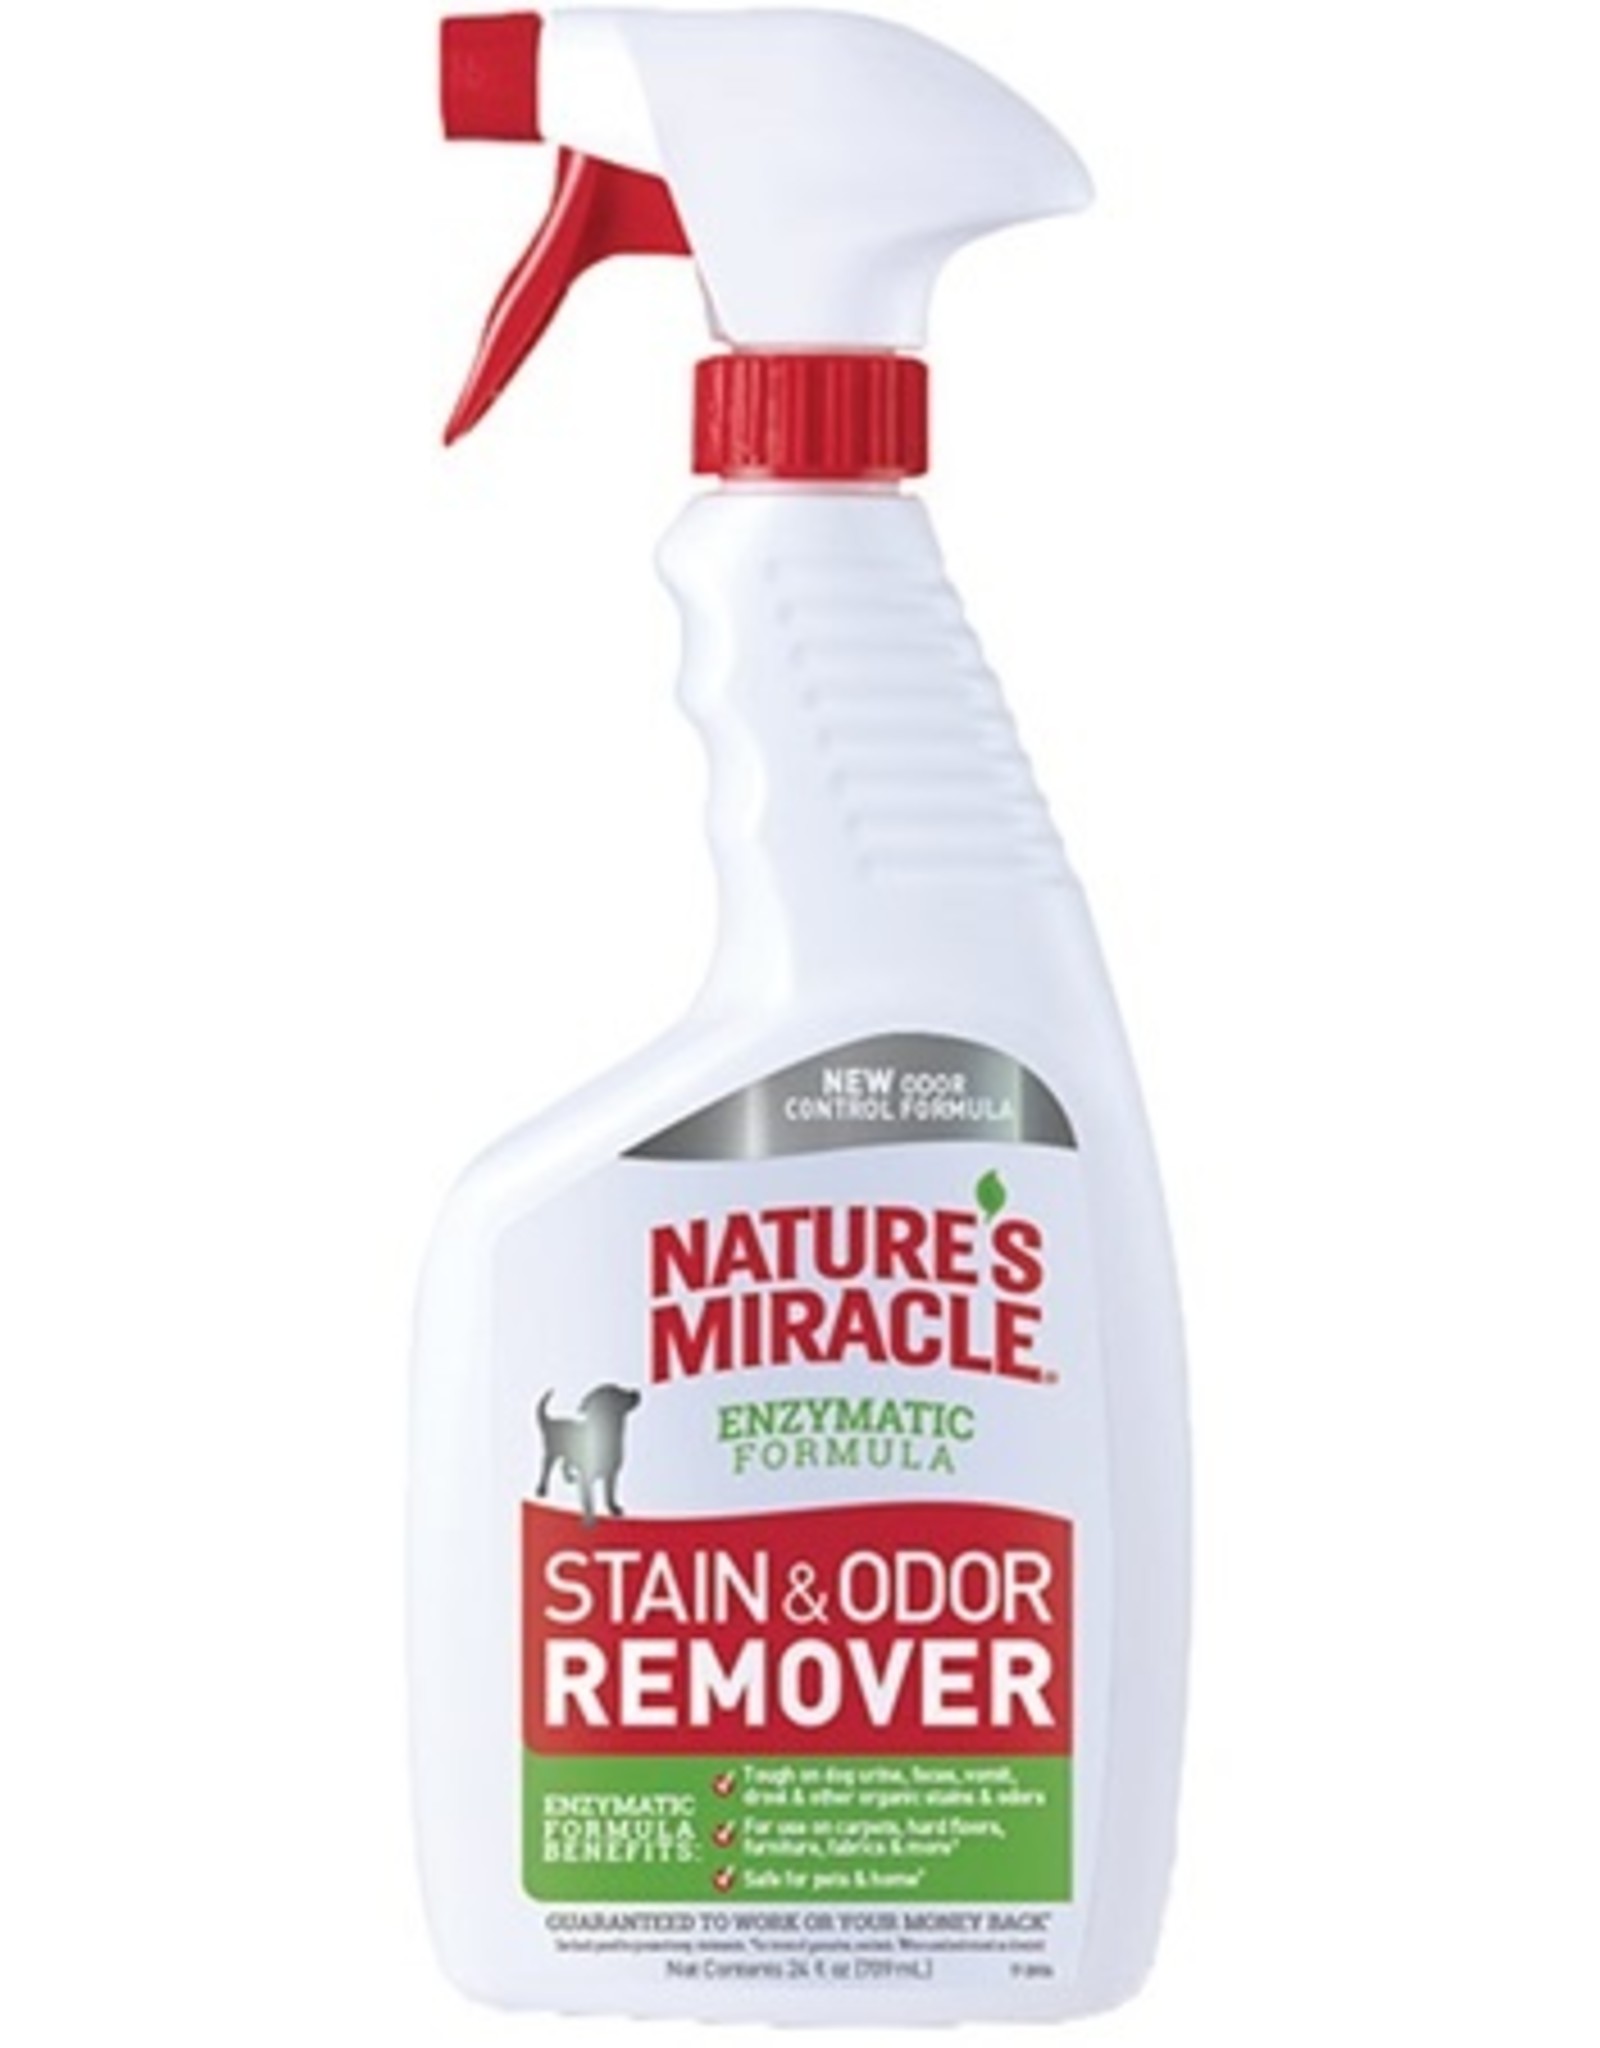 UNITED PET GROUP NATURES MIRACLE STAIN AND ODOR REMOVER SPRAY 32OZ